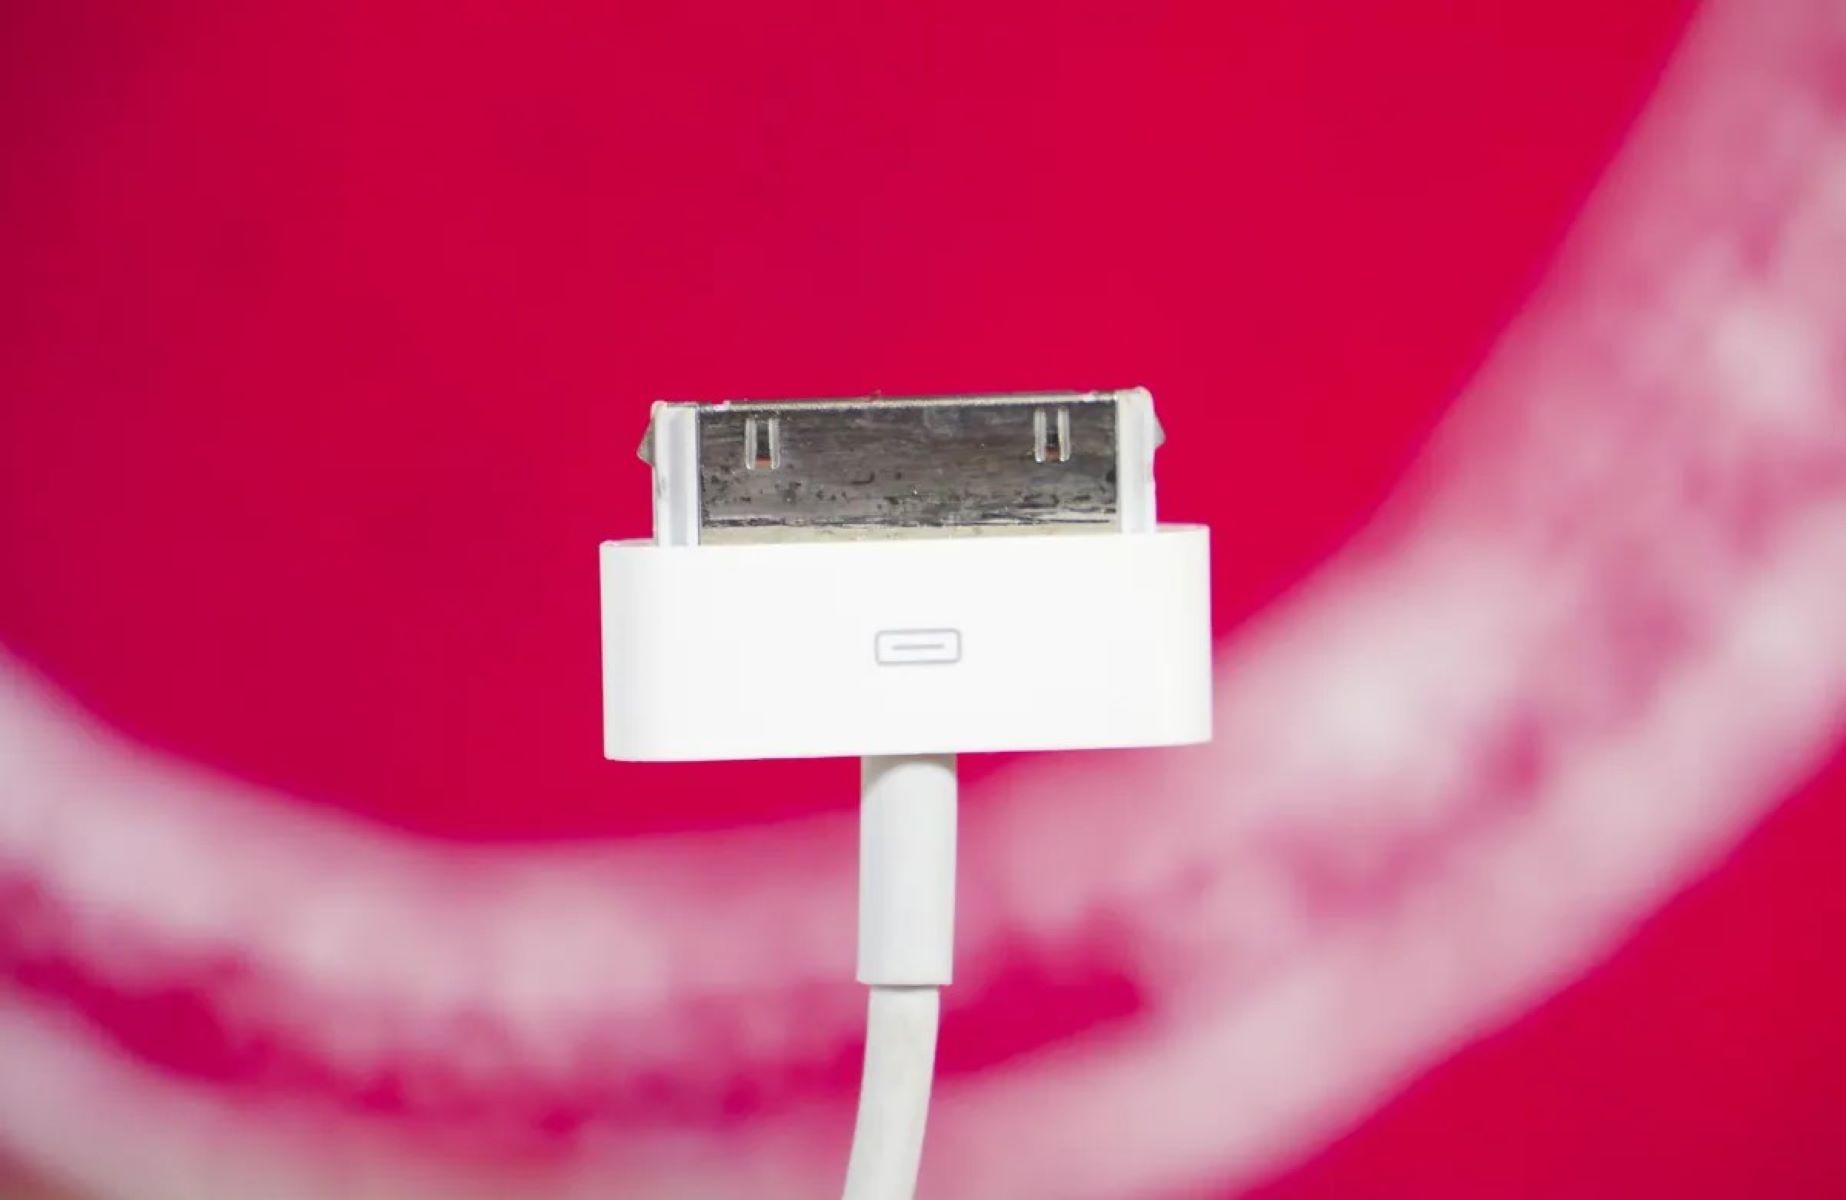 adapter-usage-utilizing-iphone-10-pin-connector-with-30-pin